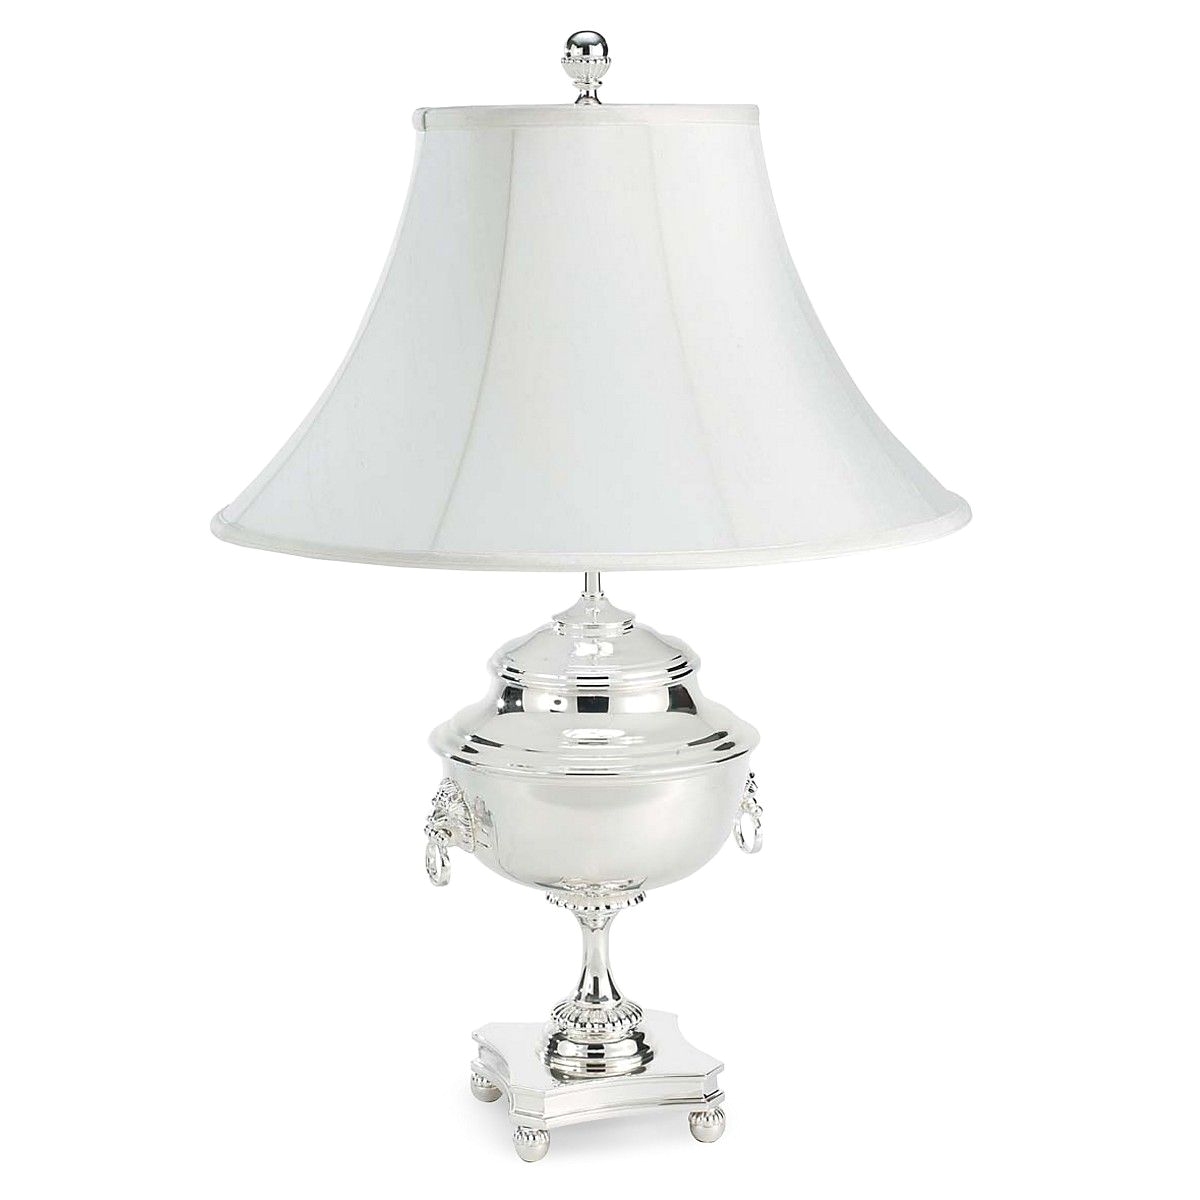 samovar table lamp by ralph lauren home home bloomingdales